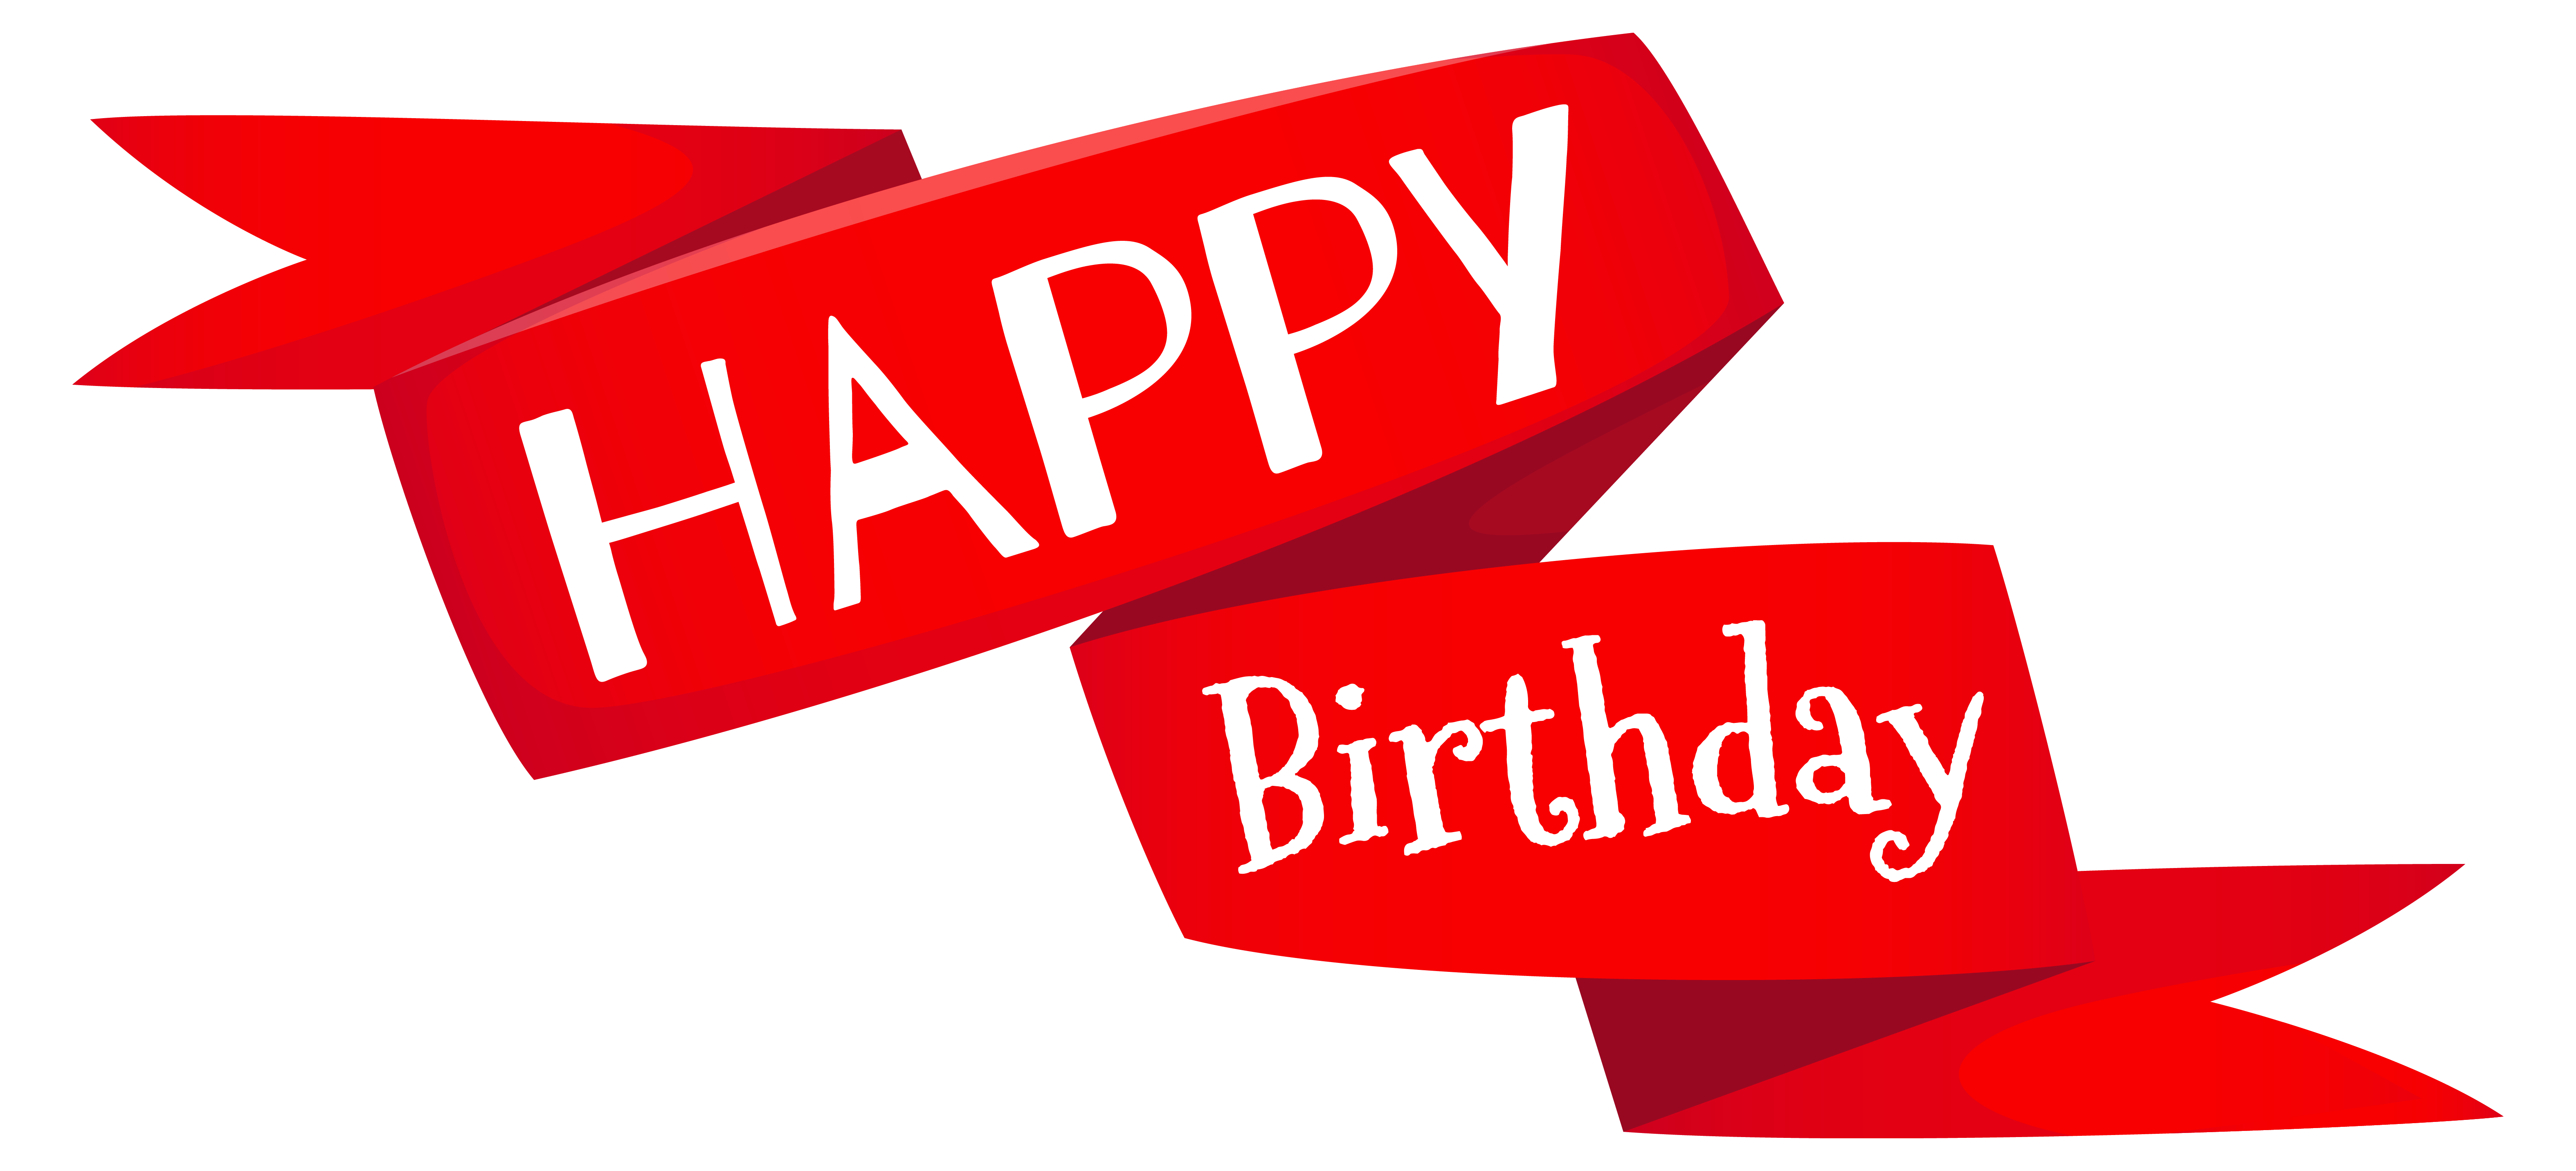 Red Happy Birthday Banner PNG Image Quality Image And Transparent PNG Free Clipart